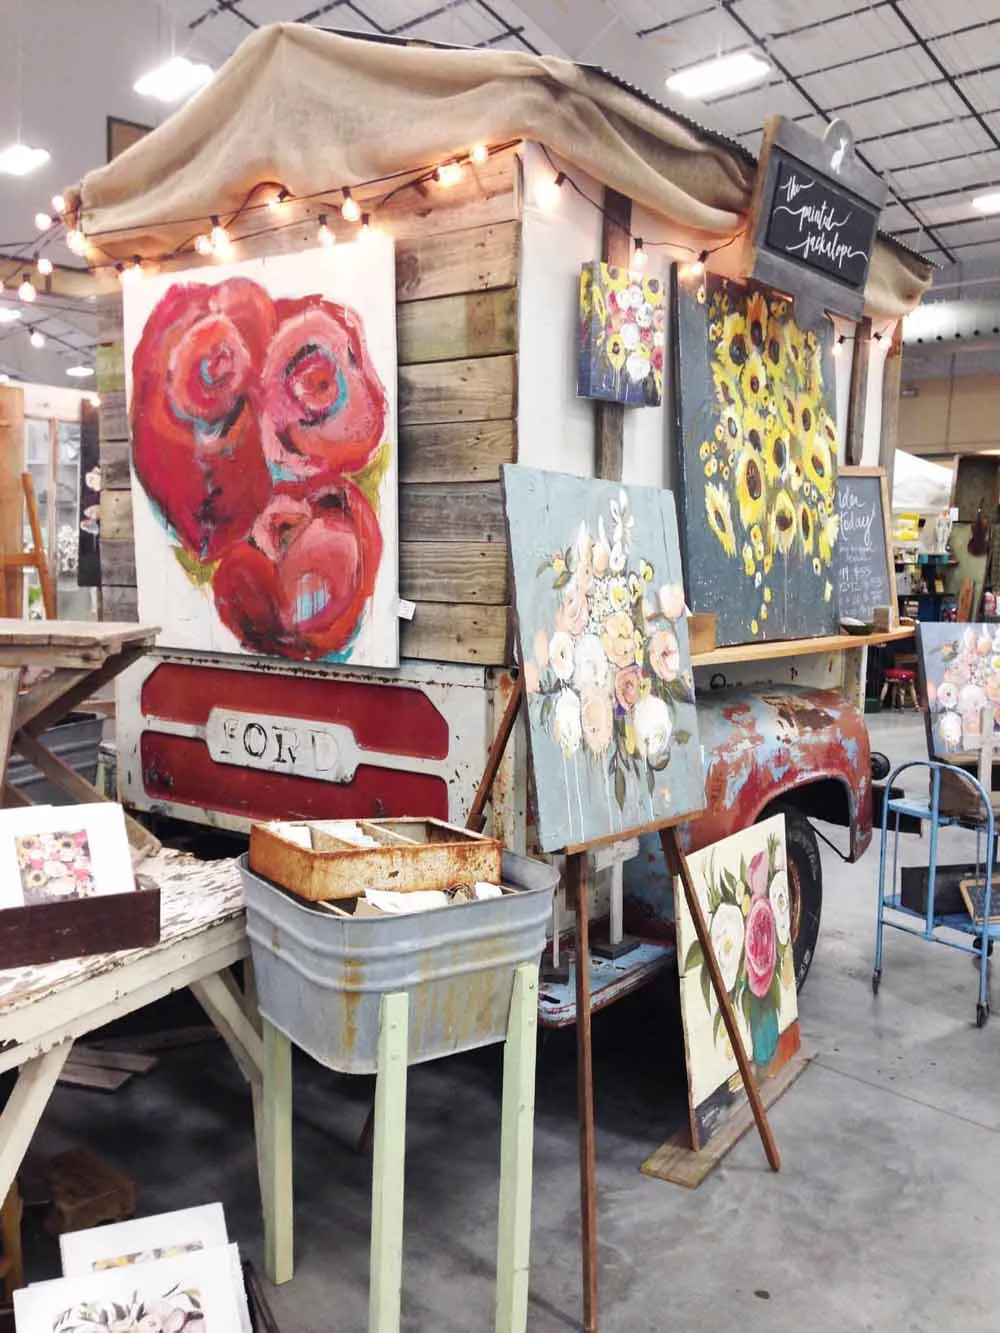 Country Living Fair Review, Photos from the Country Living Fair in Nashville, TN